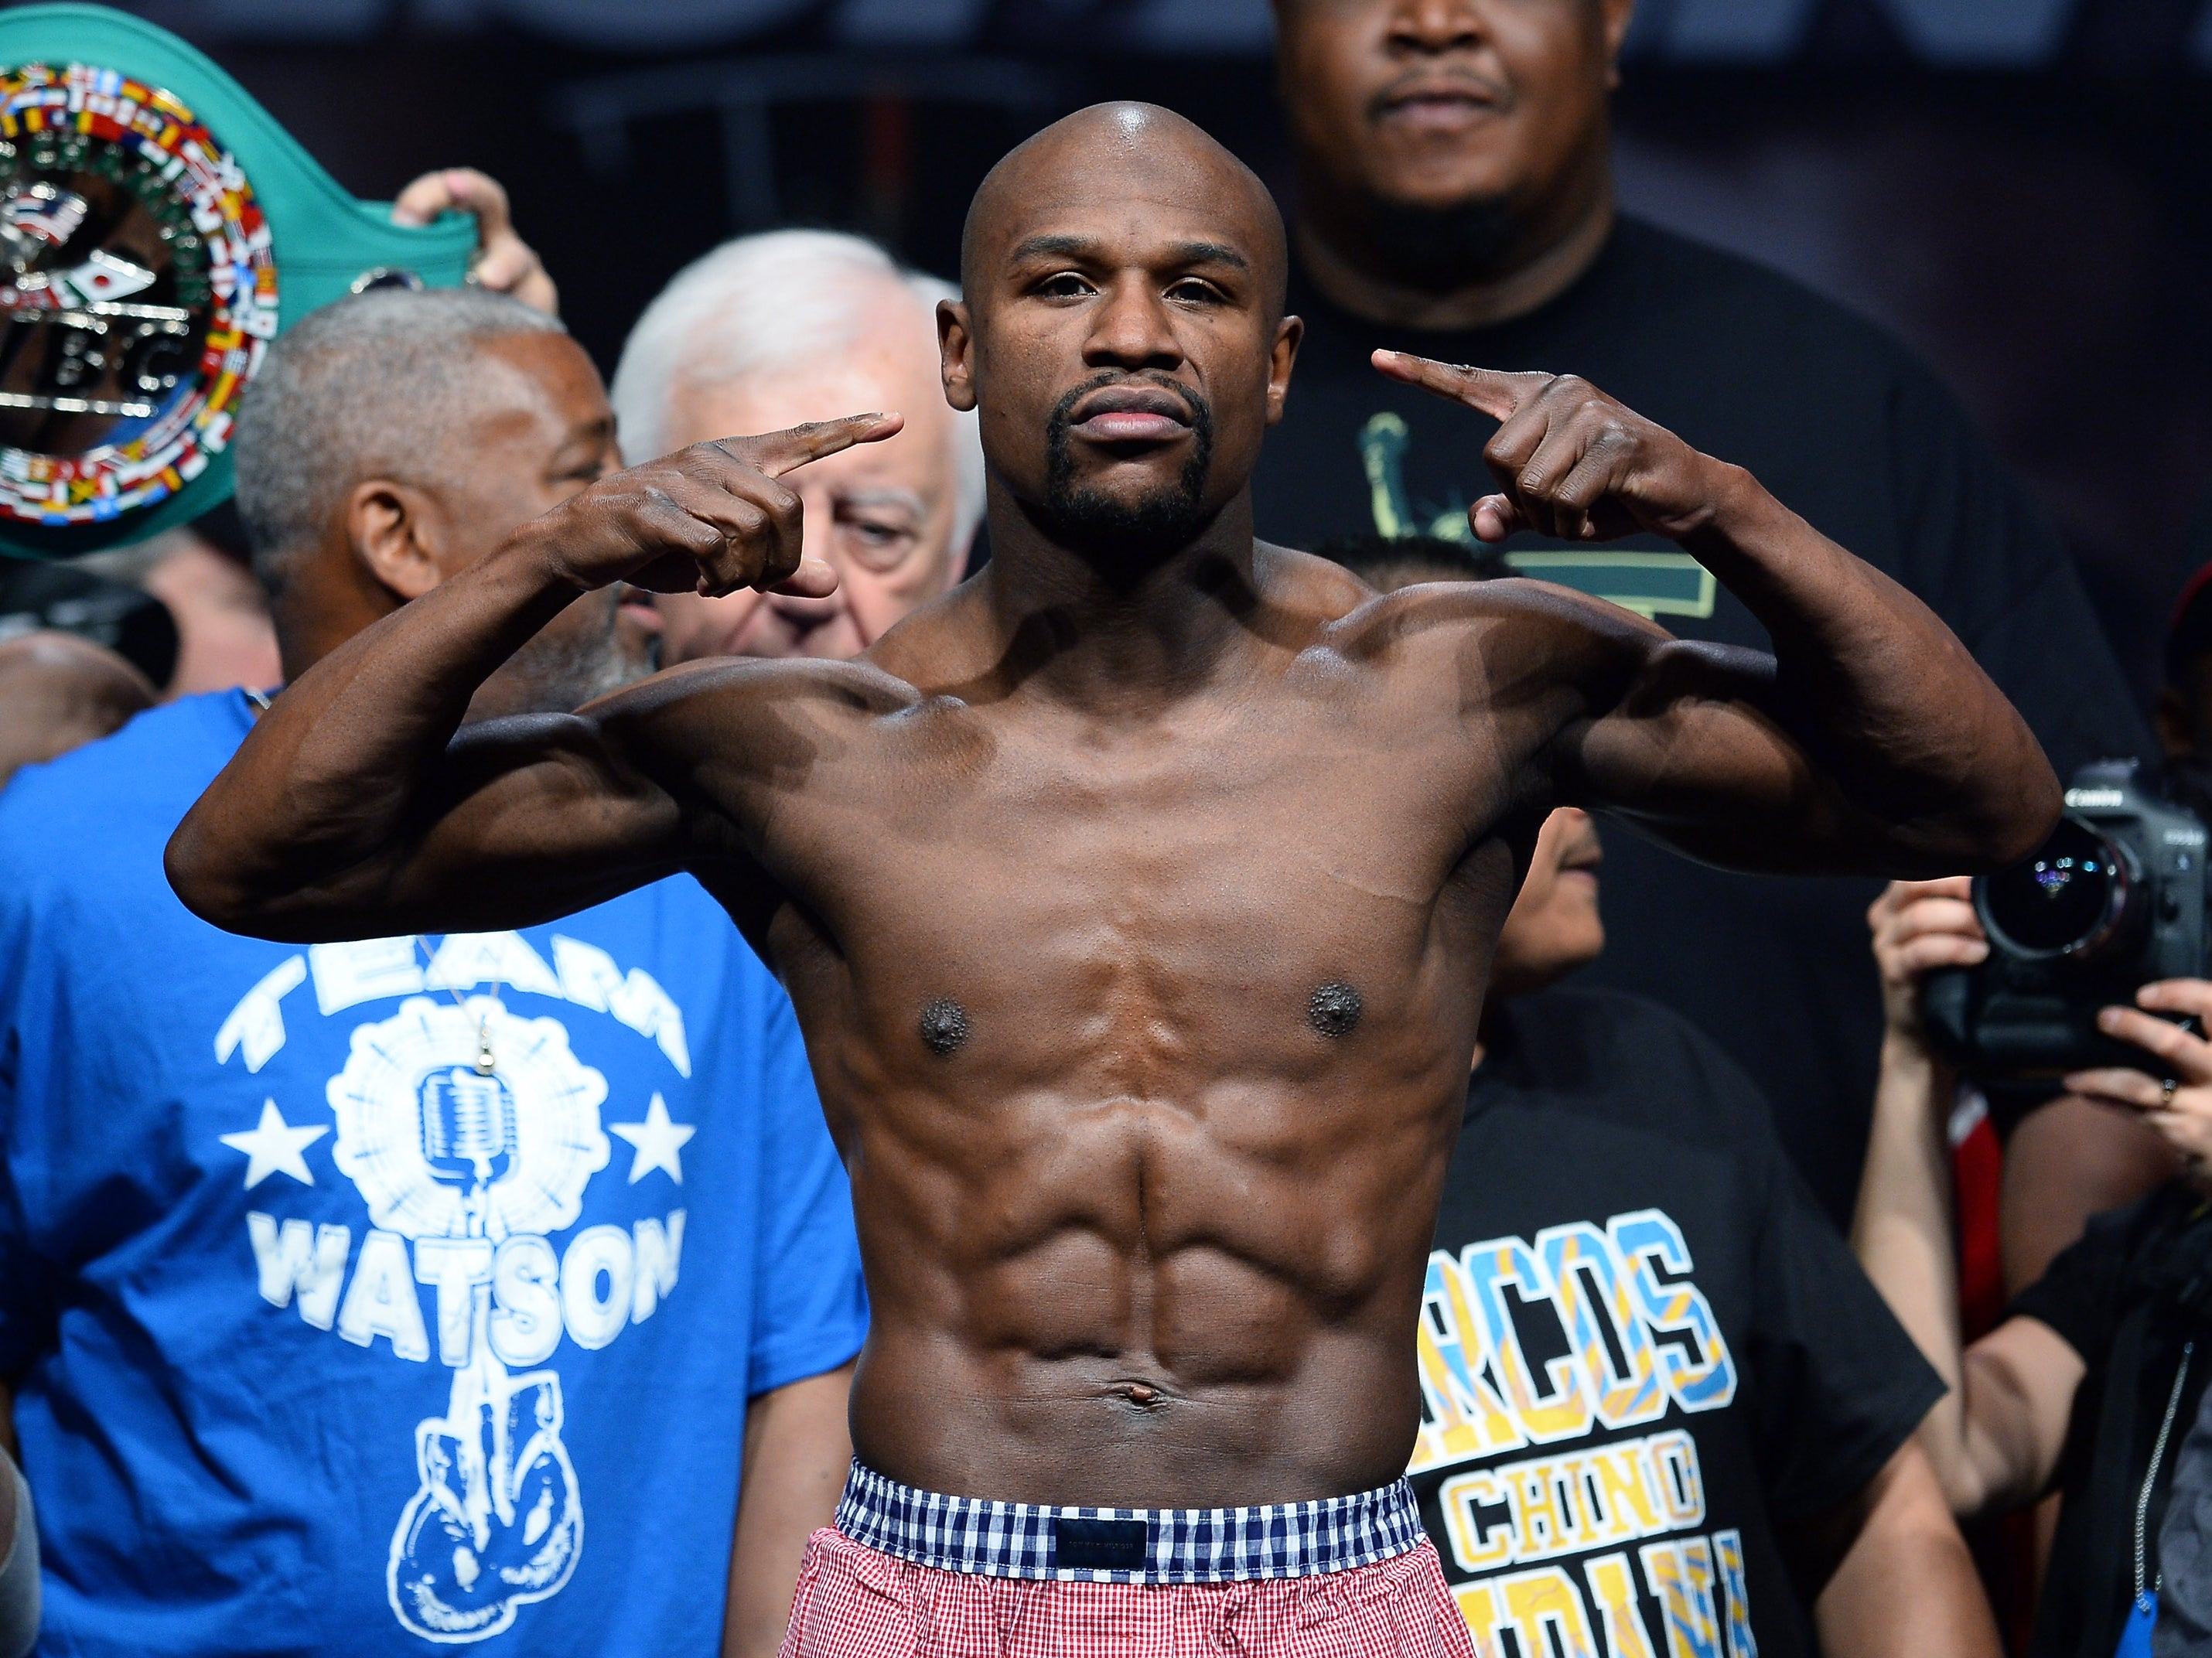 Floyd Mayweather could soon be back in the ring